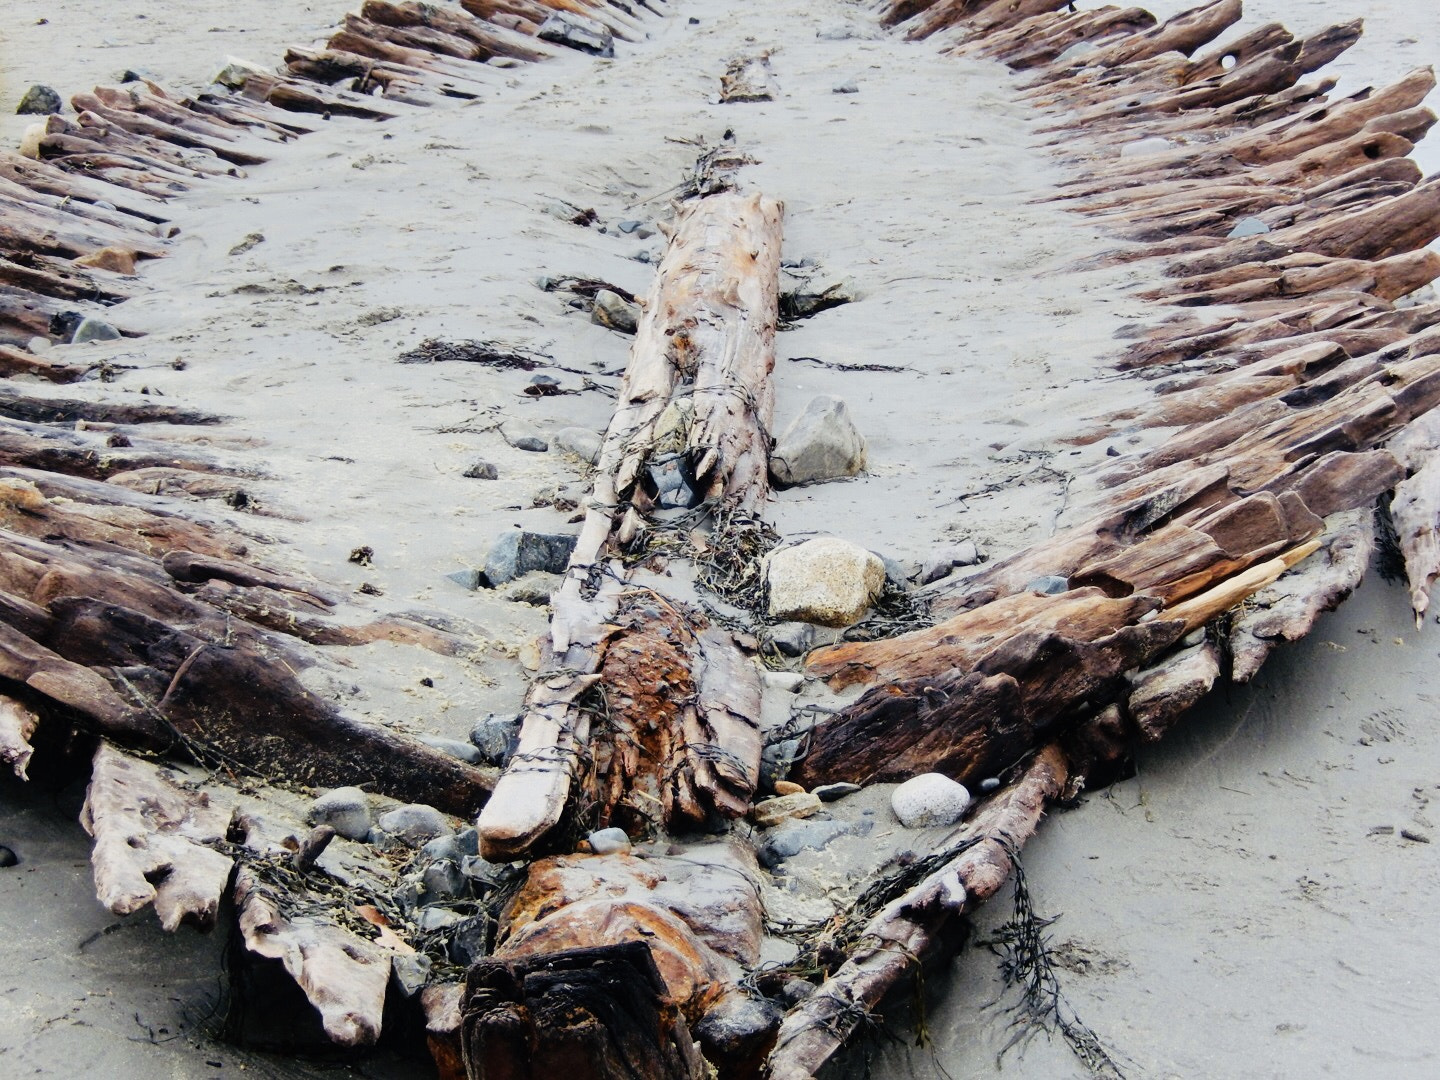 Nikon COOLPIX S9600 sample photo. Beached shipwreck, probably from the 1700s. photography